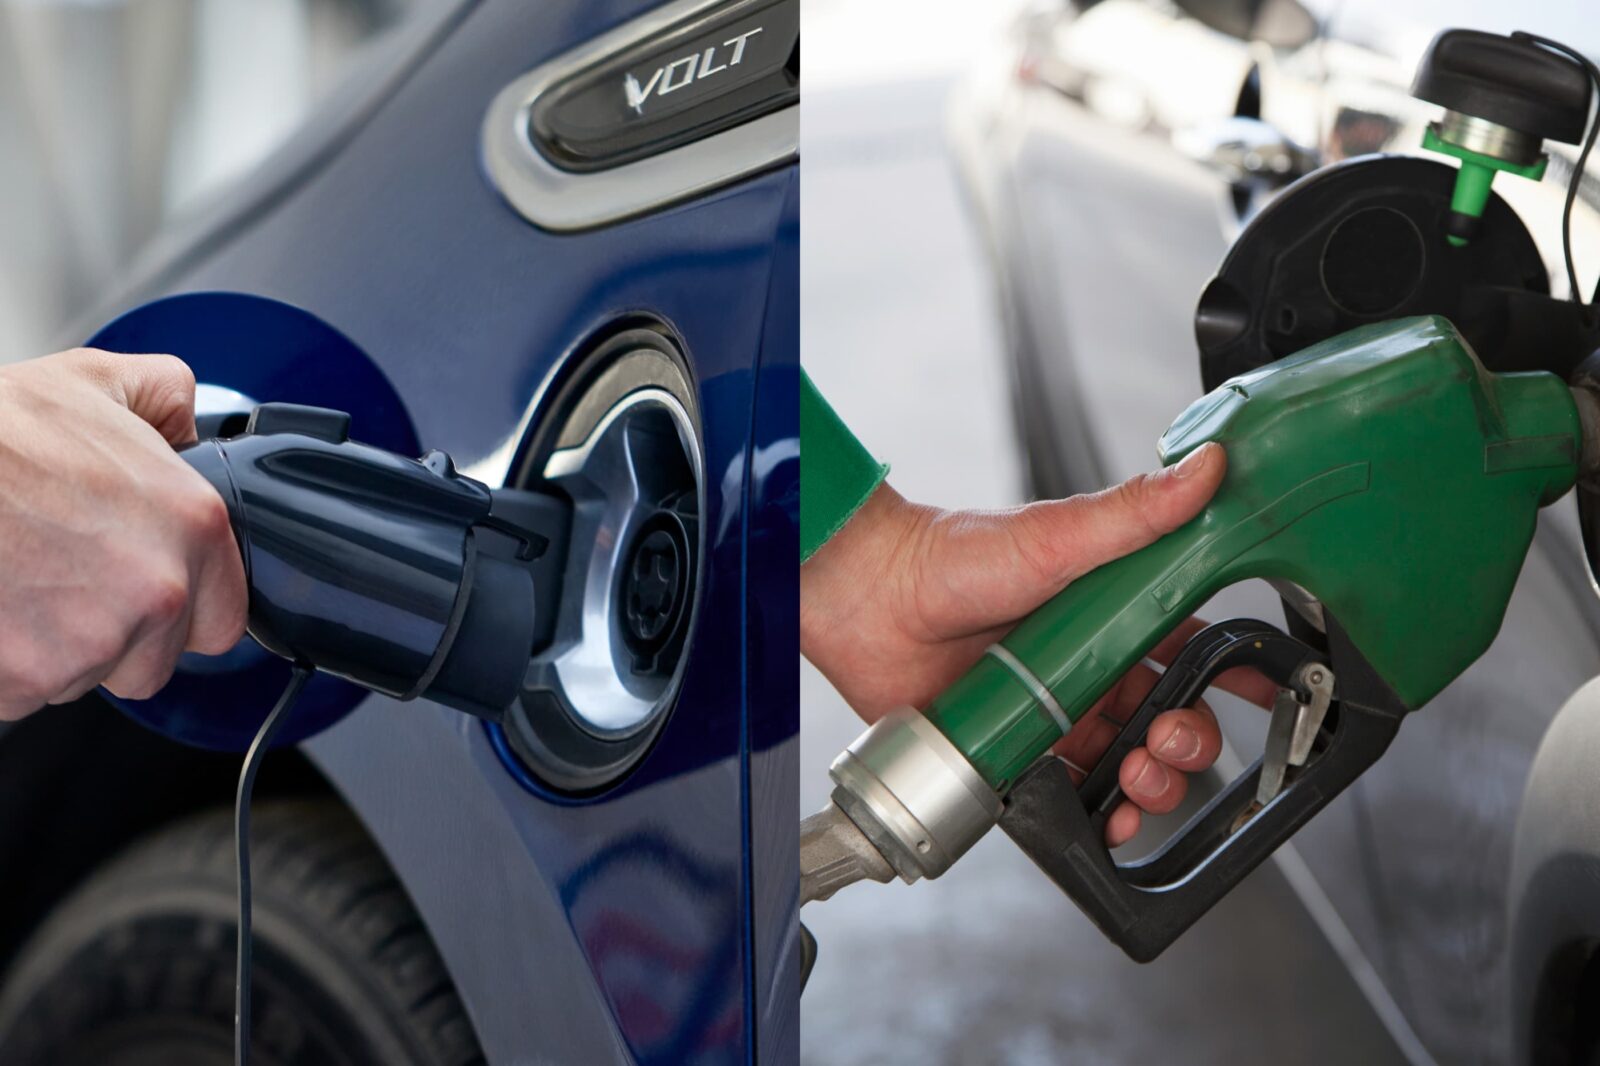 Split image of someone charging their EV while another person pumps diesel fuel into a vehicle.